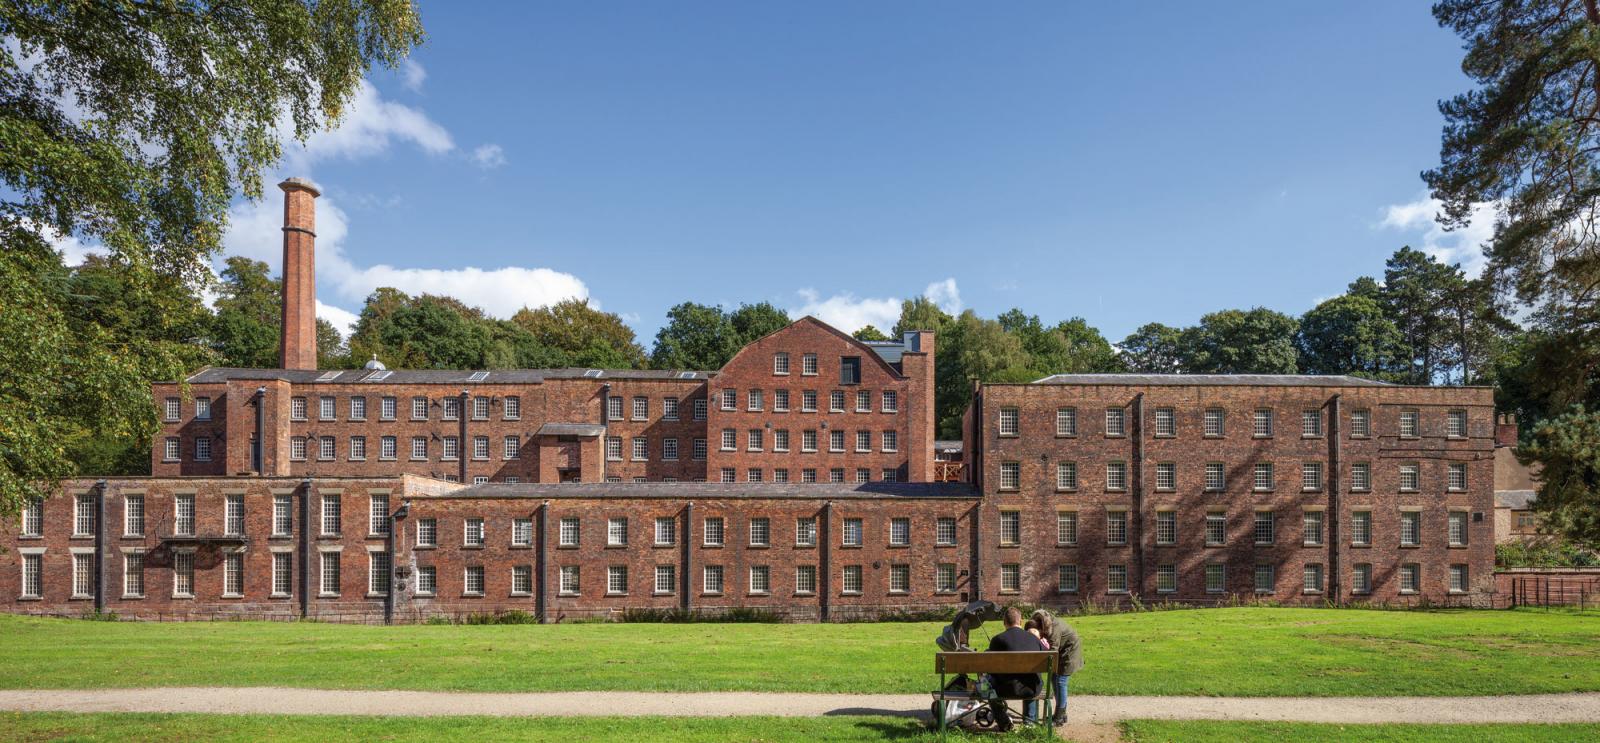 exterior of quarry bank mill, lengthy historic red brick building